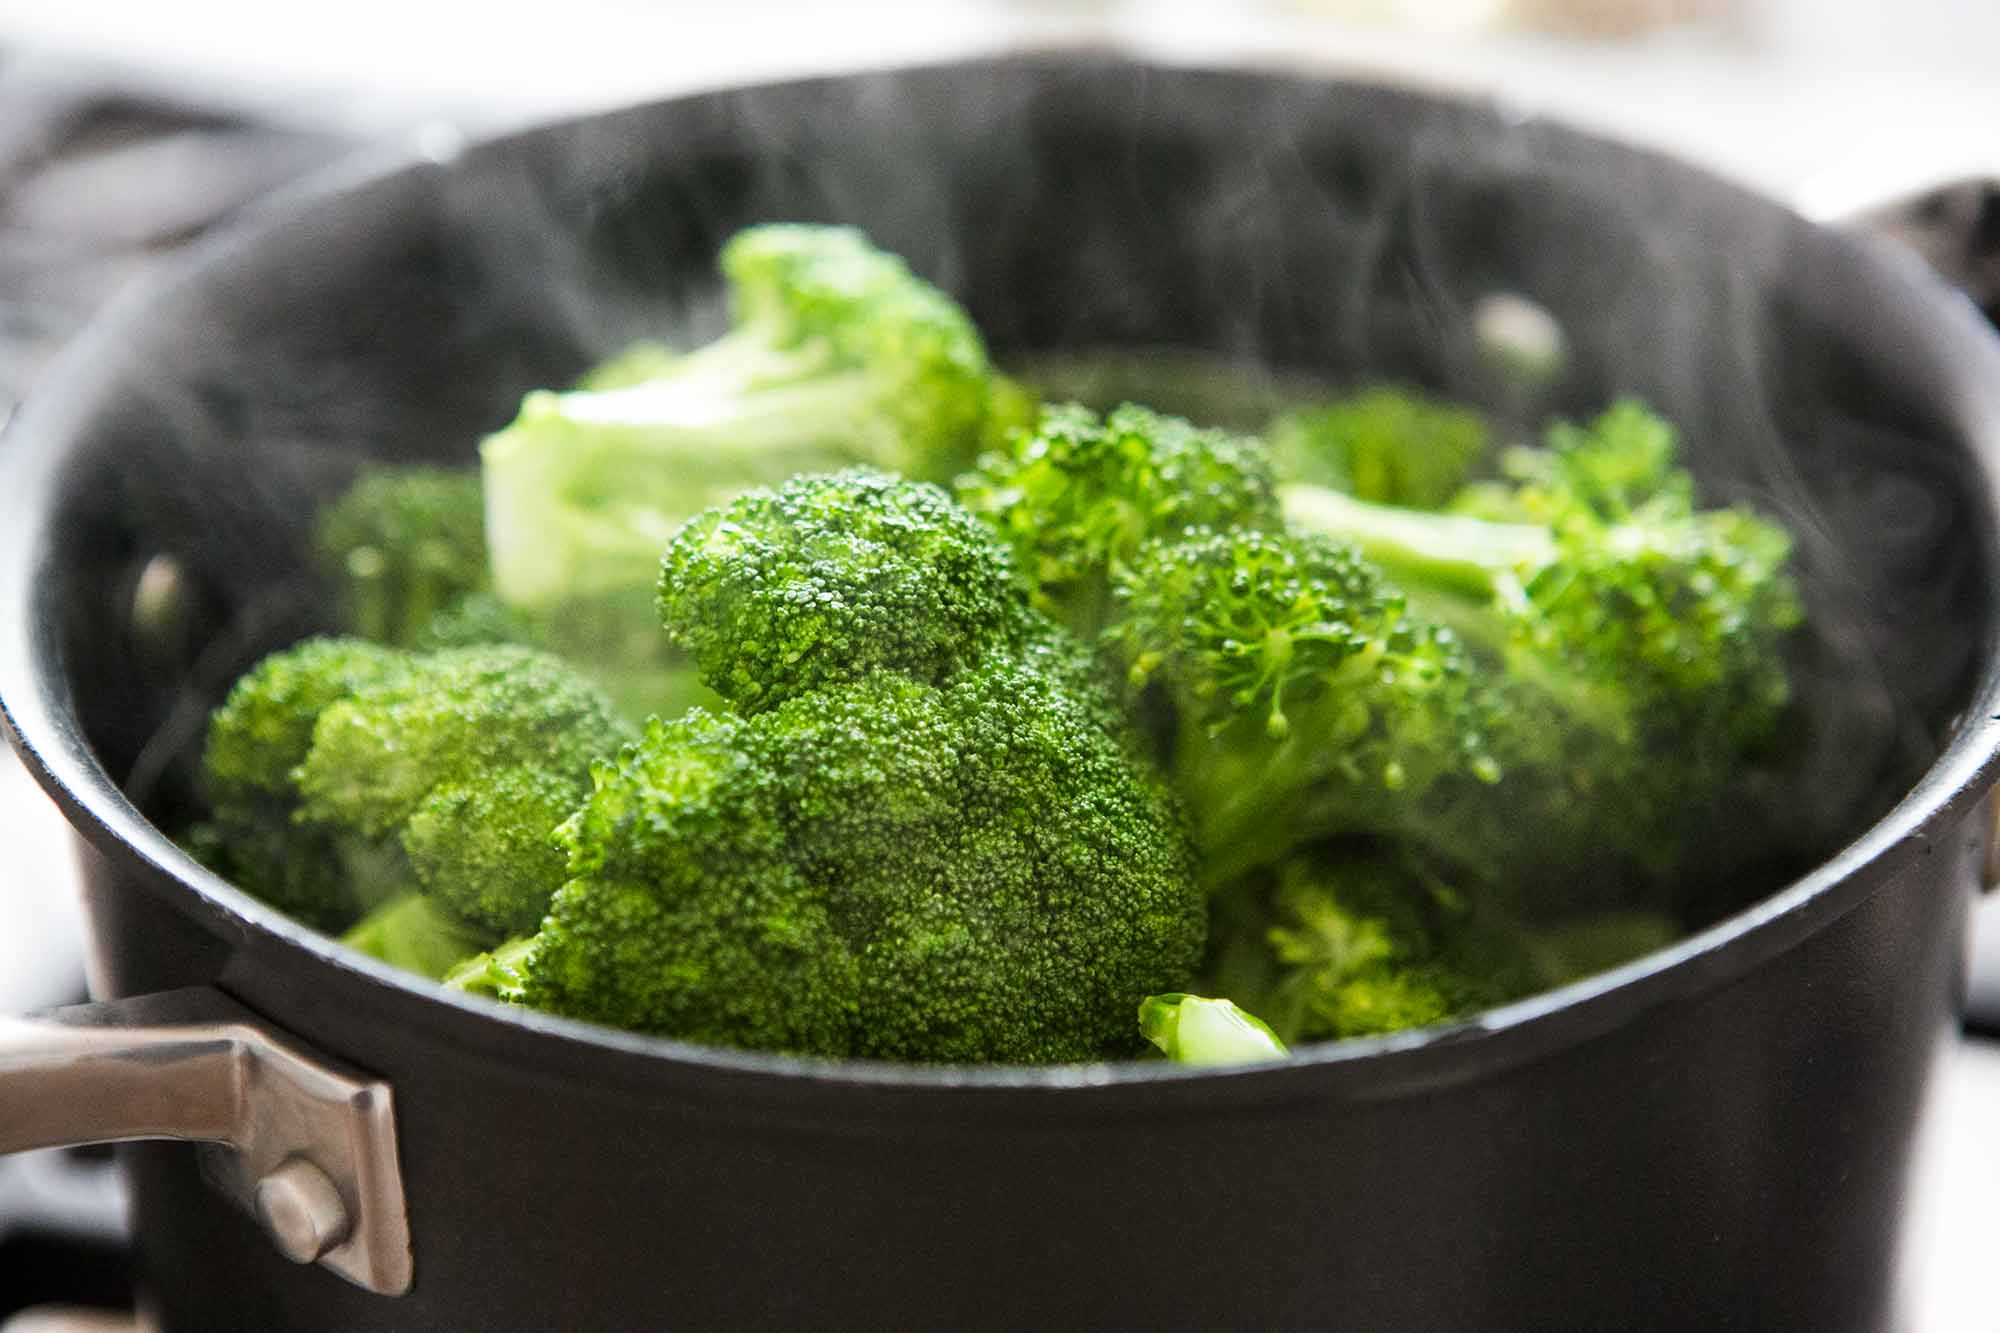 Steam Broccoli In Microwave
 How to Steam Broccoli Perfectly Every Time